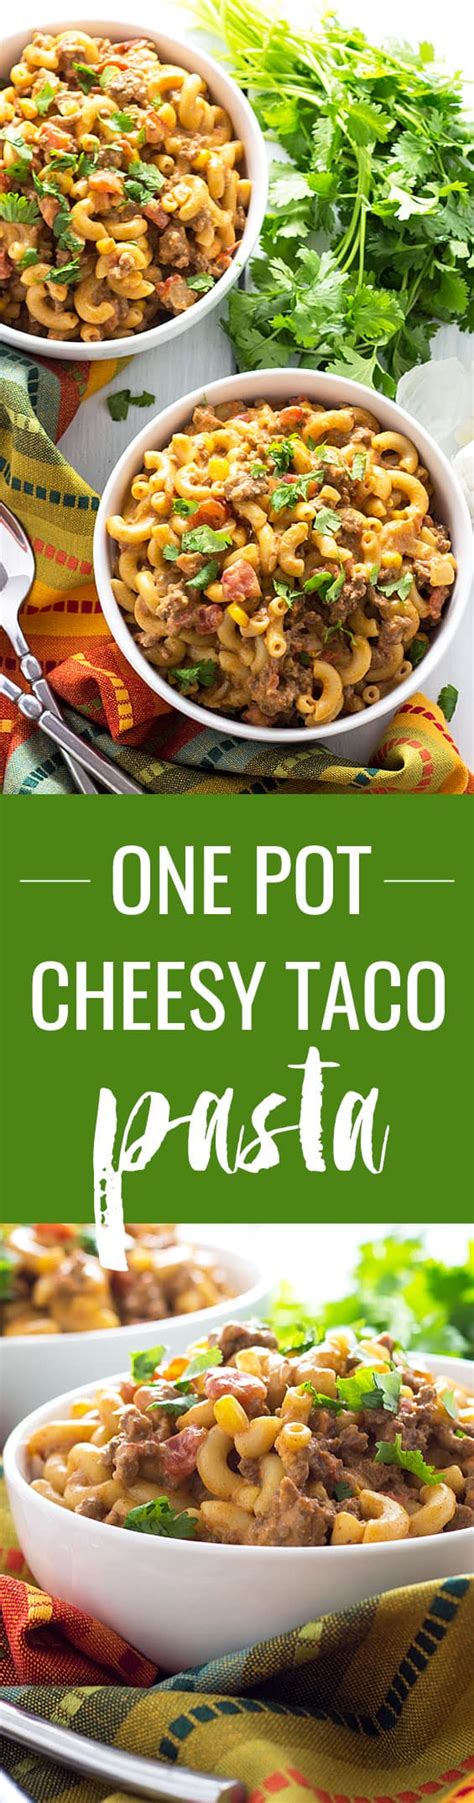 One Pot Cheesy Taco Pasta The Blond Cook